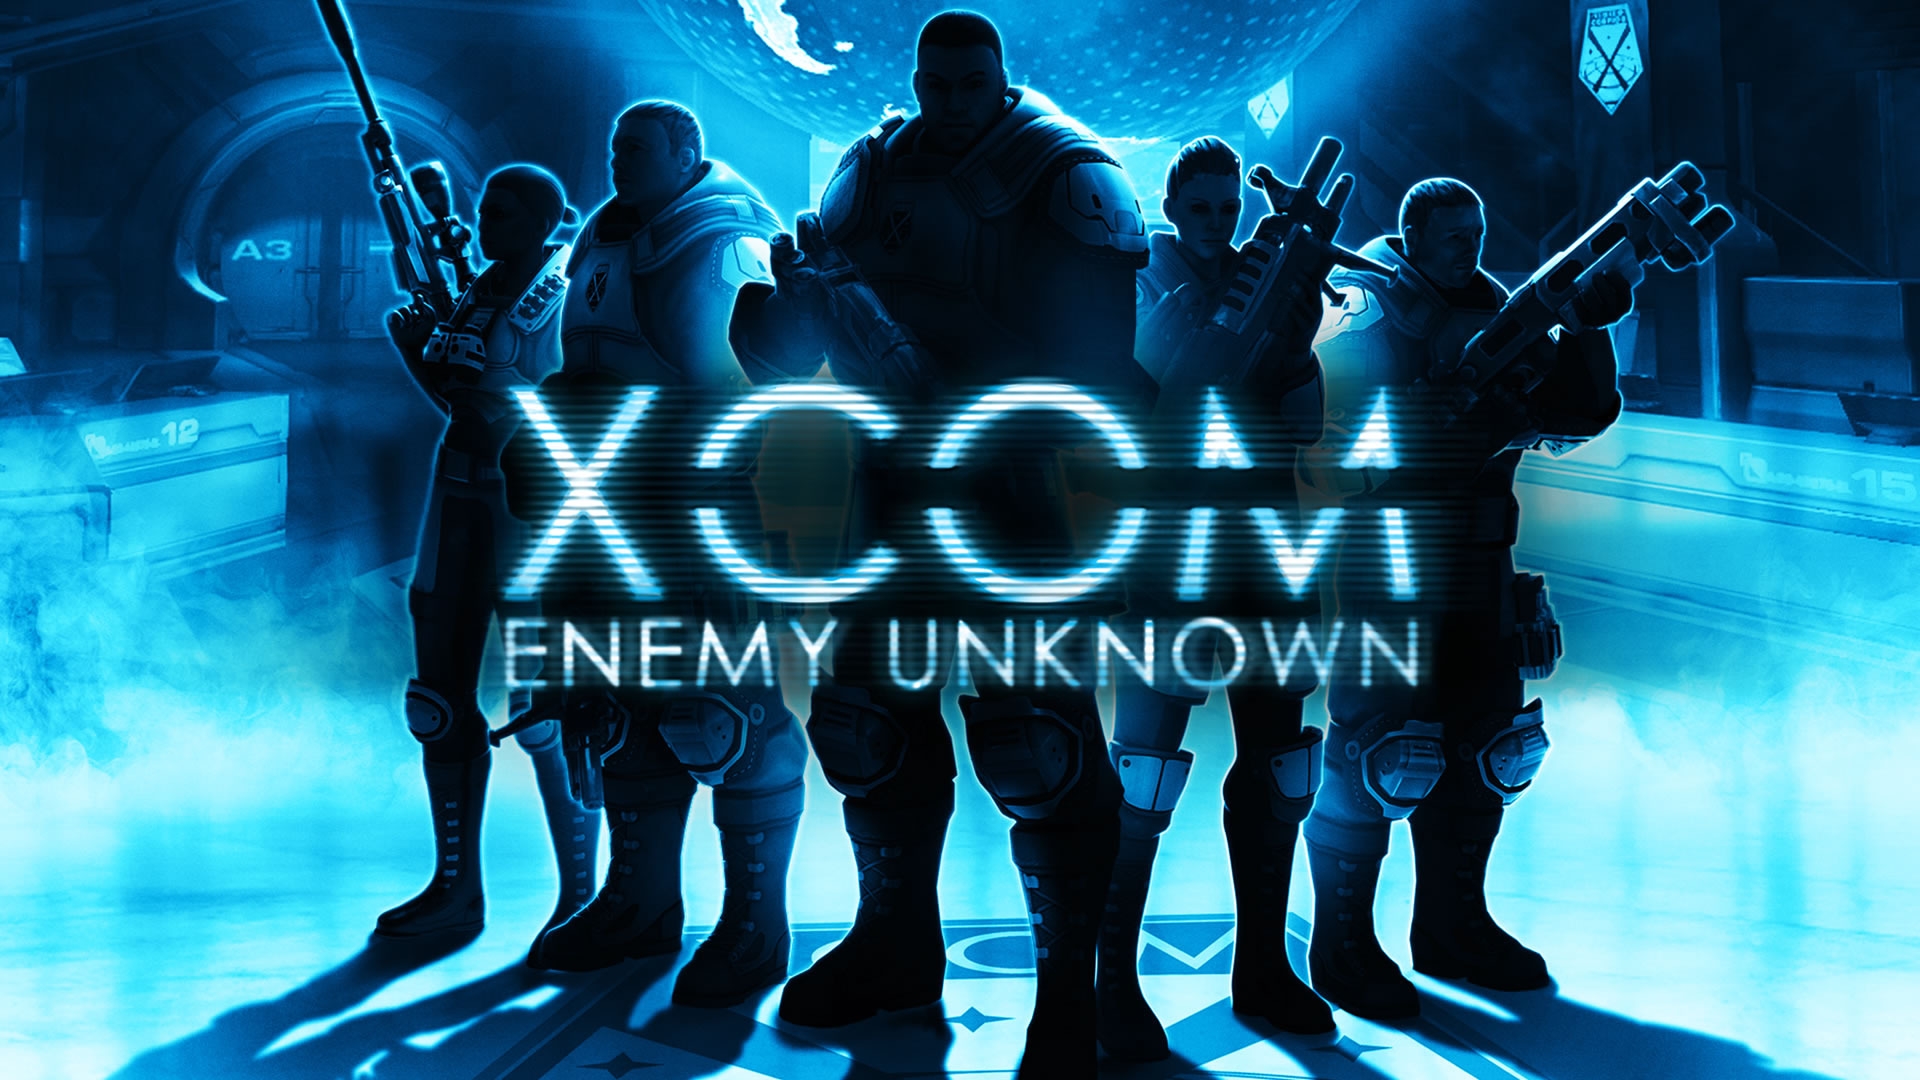 XCOM Enemy Unknown for 1920 x 1080 HDTV 1080p resolution